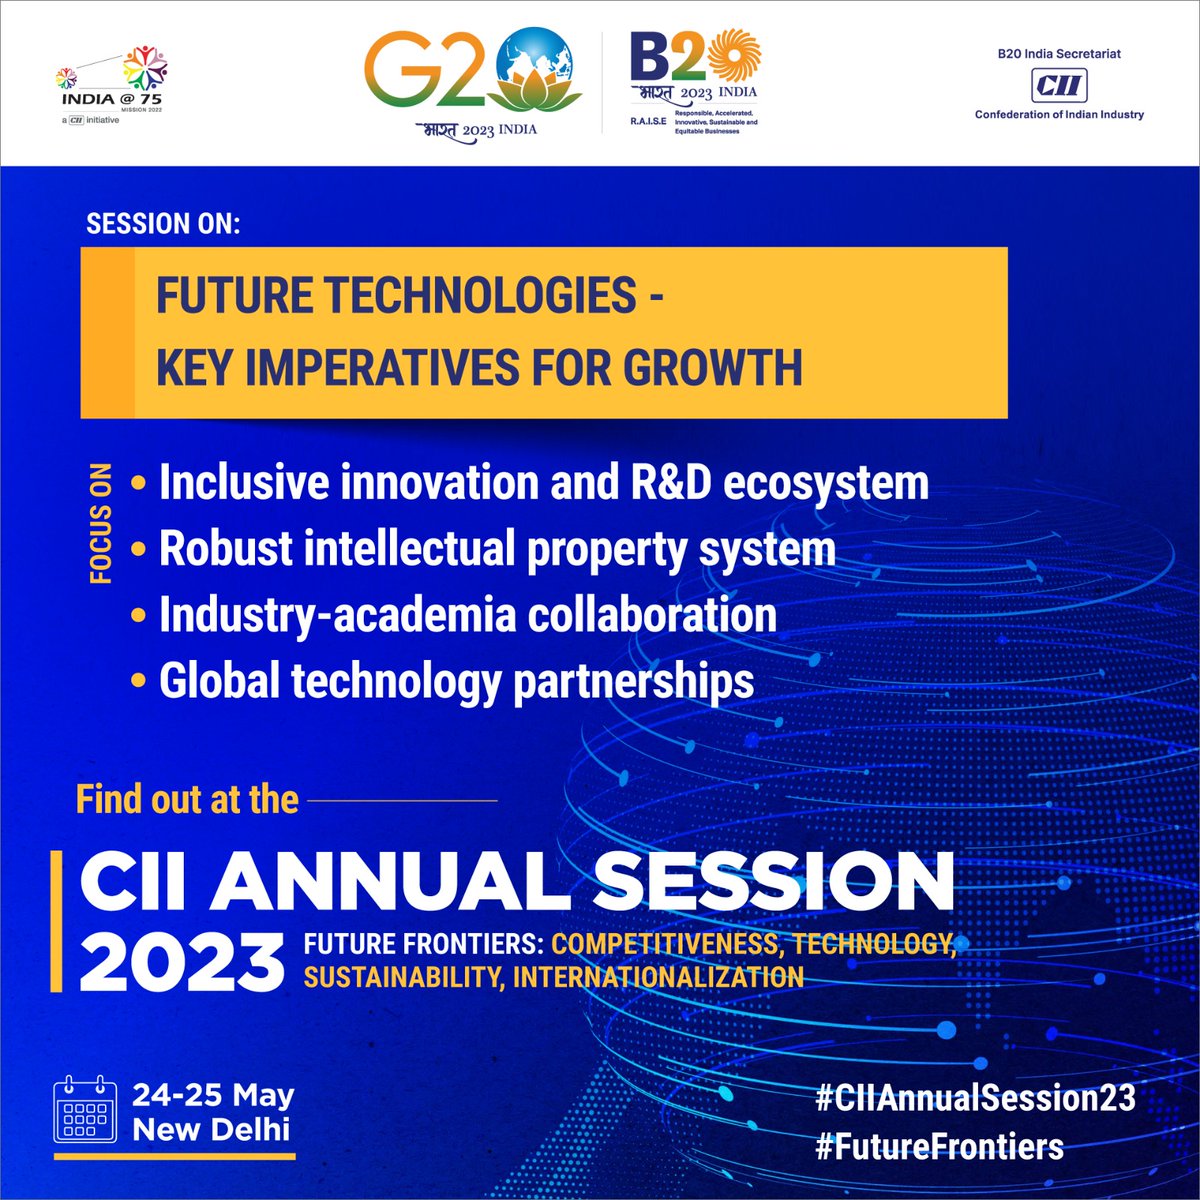 #StayTuned as decision makers & thought leaders deliberate on the ‘Future Technologies - Key Imperatives for Growth' at the #CIIAnnualSession23.
Visit➡ ciiannualsession.in/index.html 
#FutureFrontiers #technology #sustainability #development